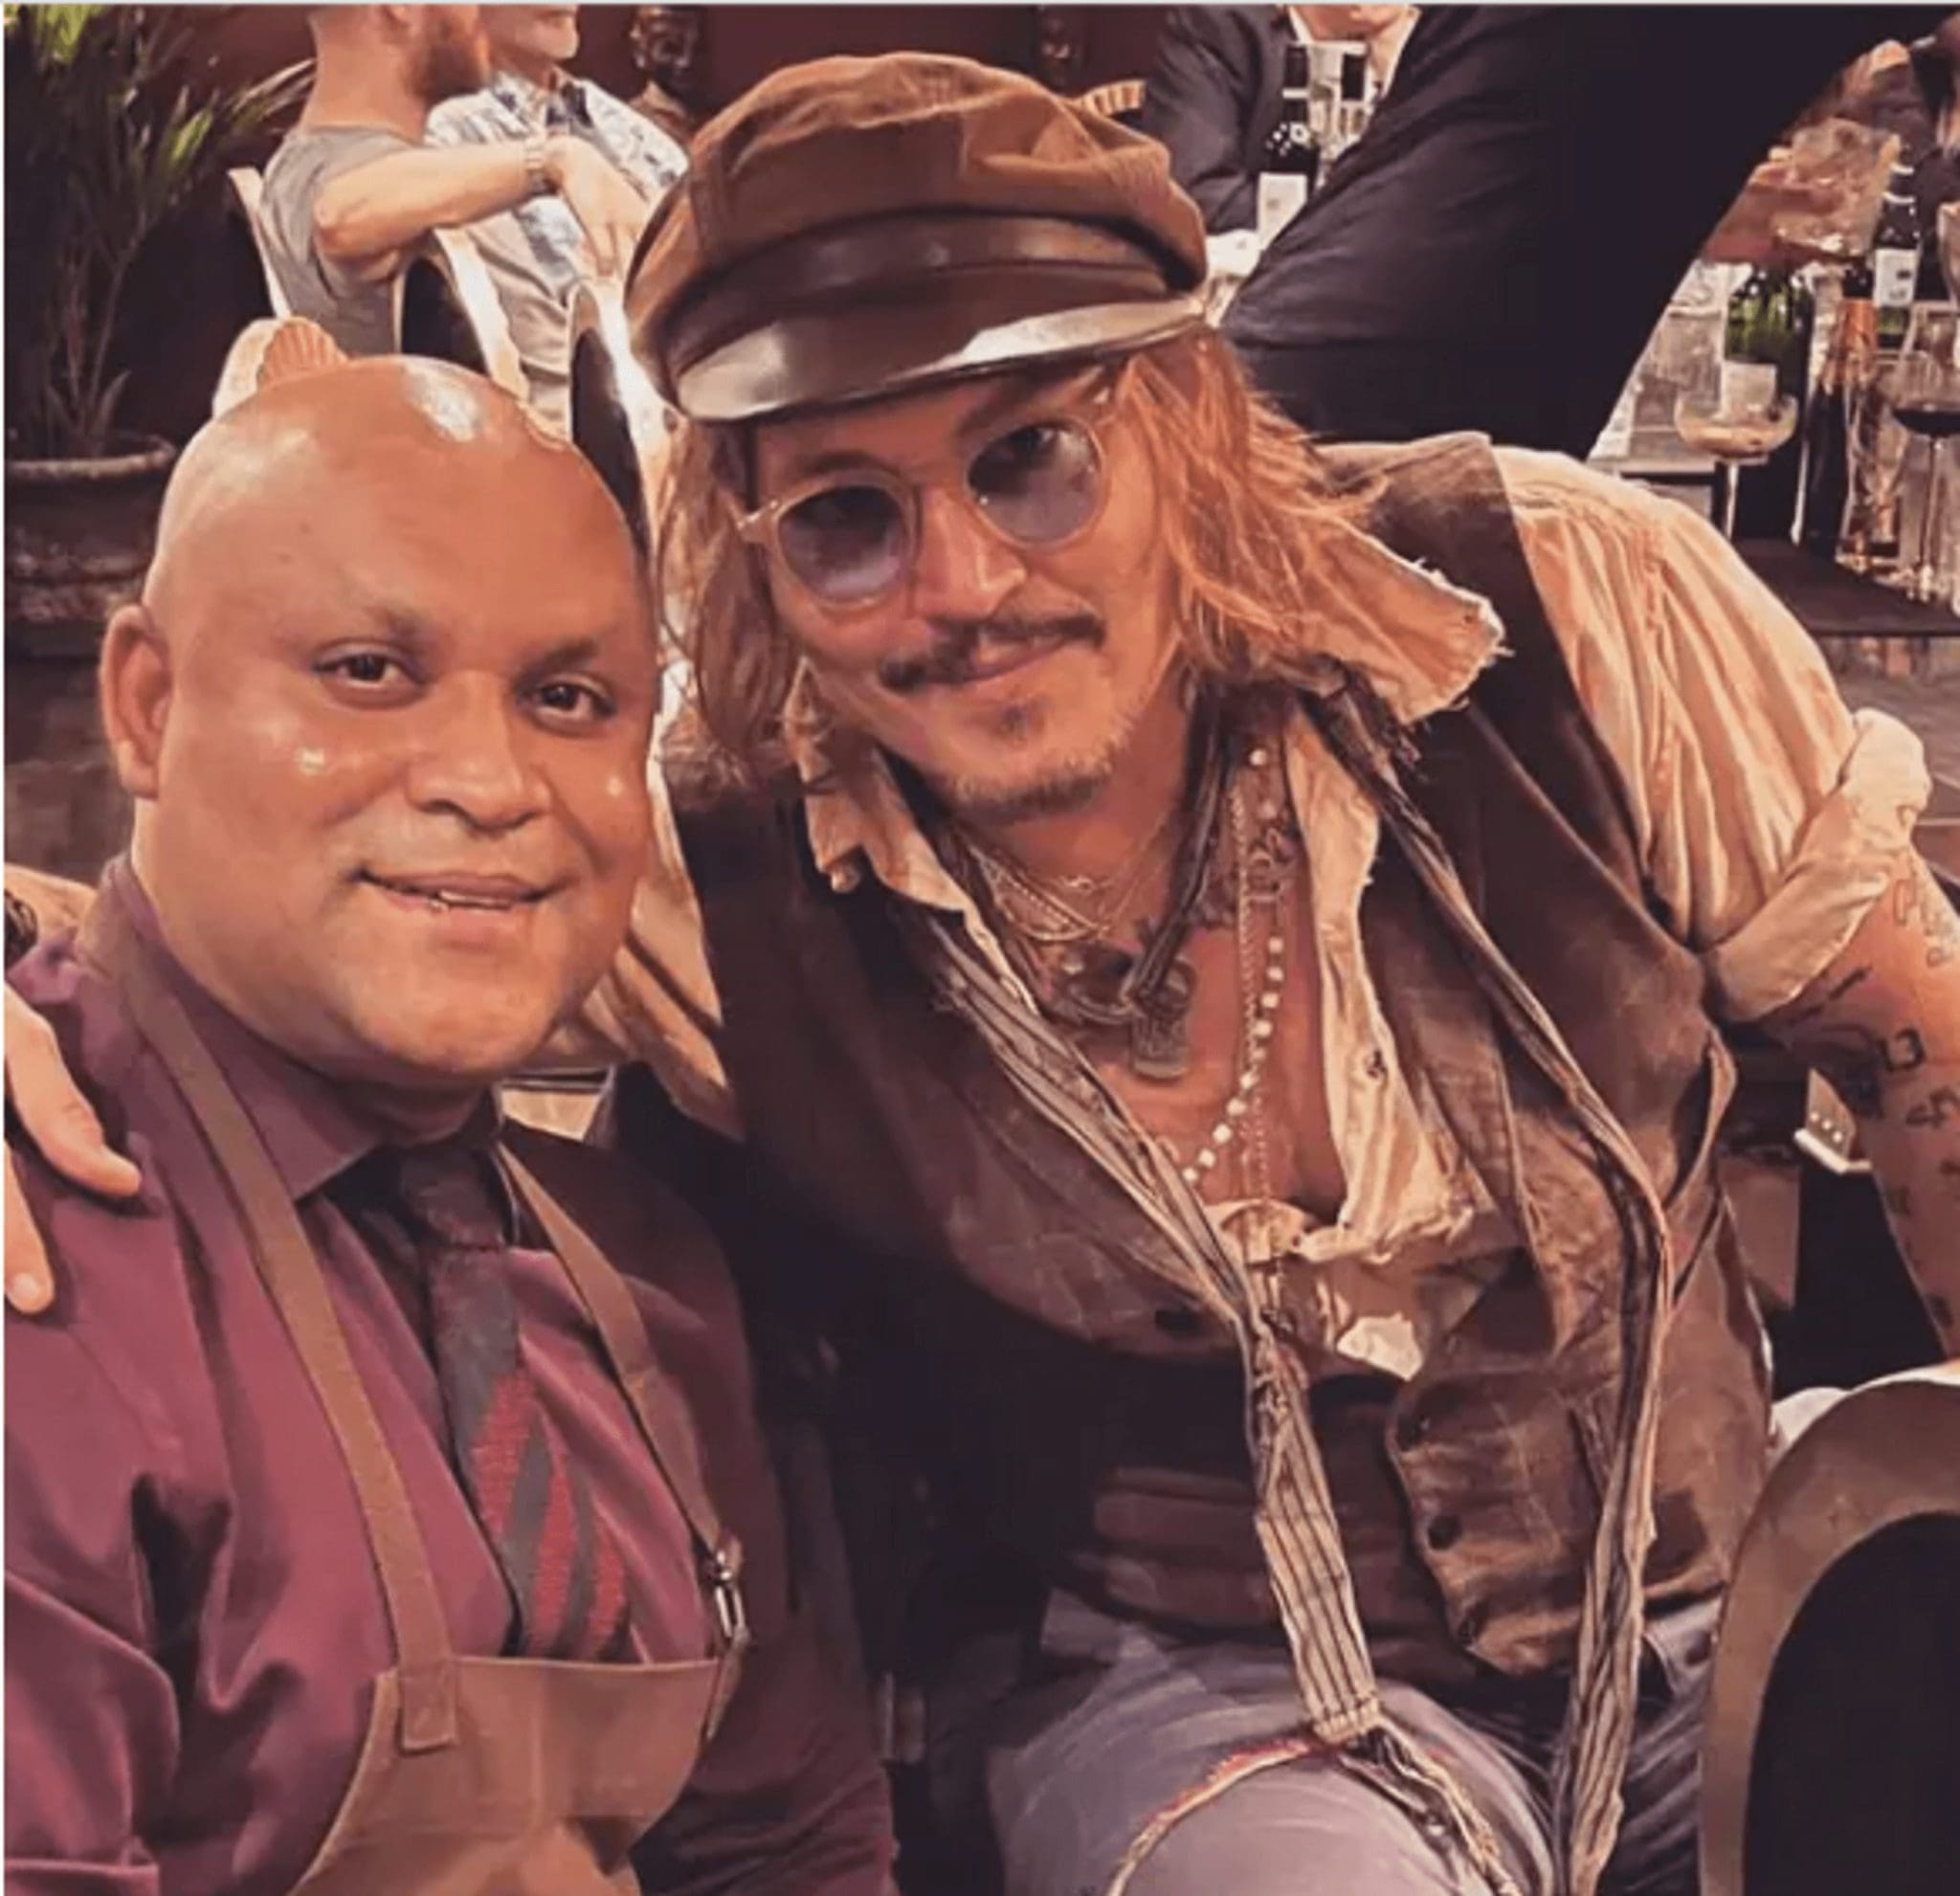 Johnny Depp celebrated victory in court at an Indian restaurant, having dined on $63,000